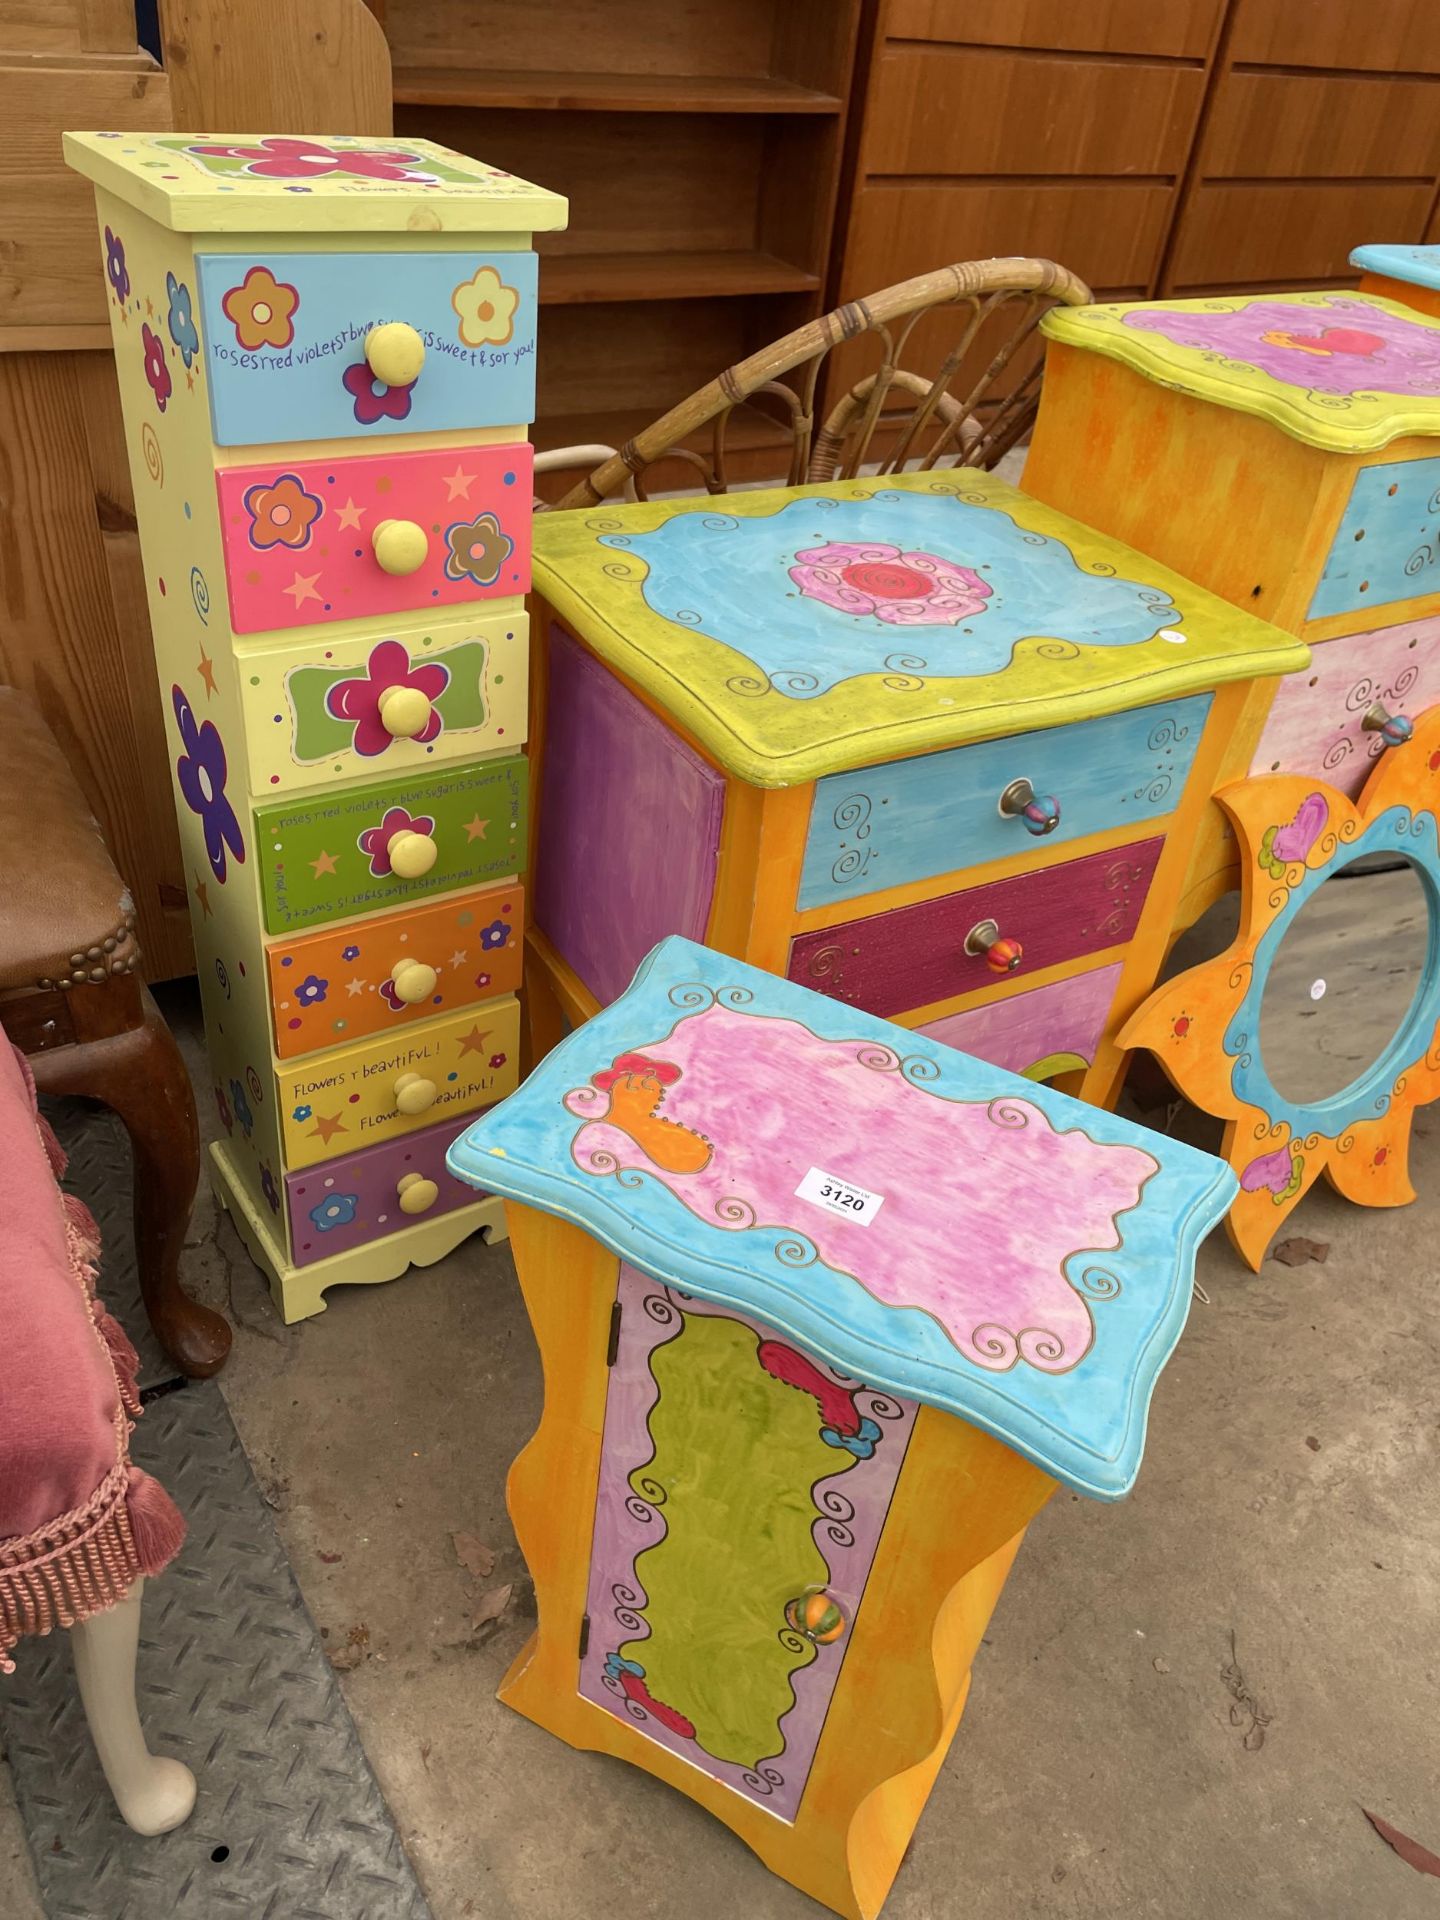 A RANGE OF BRIGHTLY PAINTED BEDTOOM FURNITURE, 3 CHESTS, MIRROR, CUPBOARDS AND SMALL TABLE - Image 2 of 6